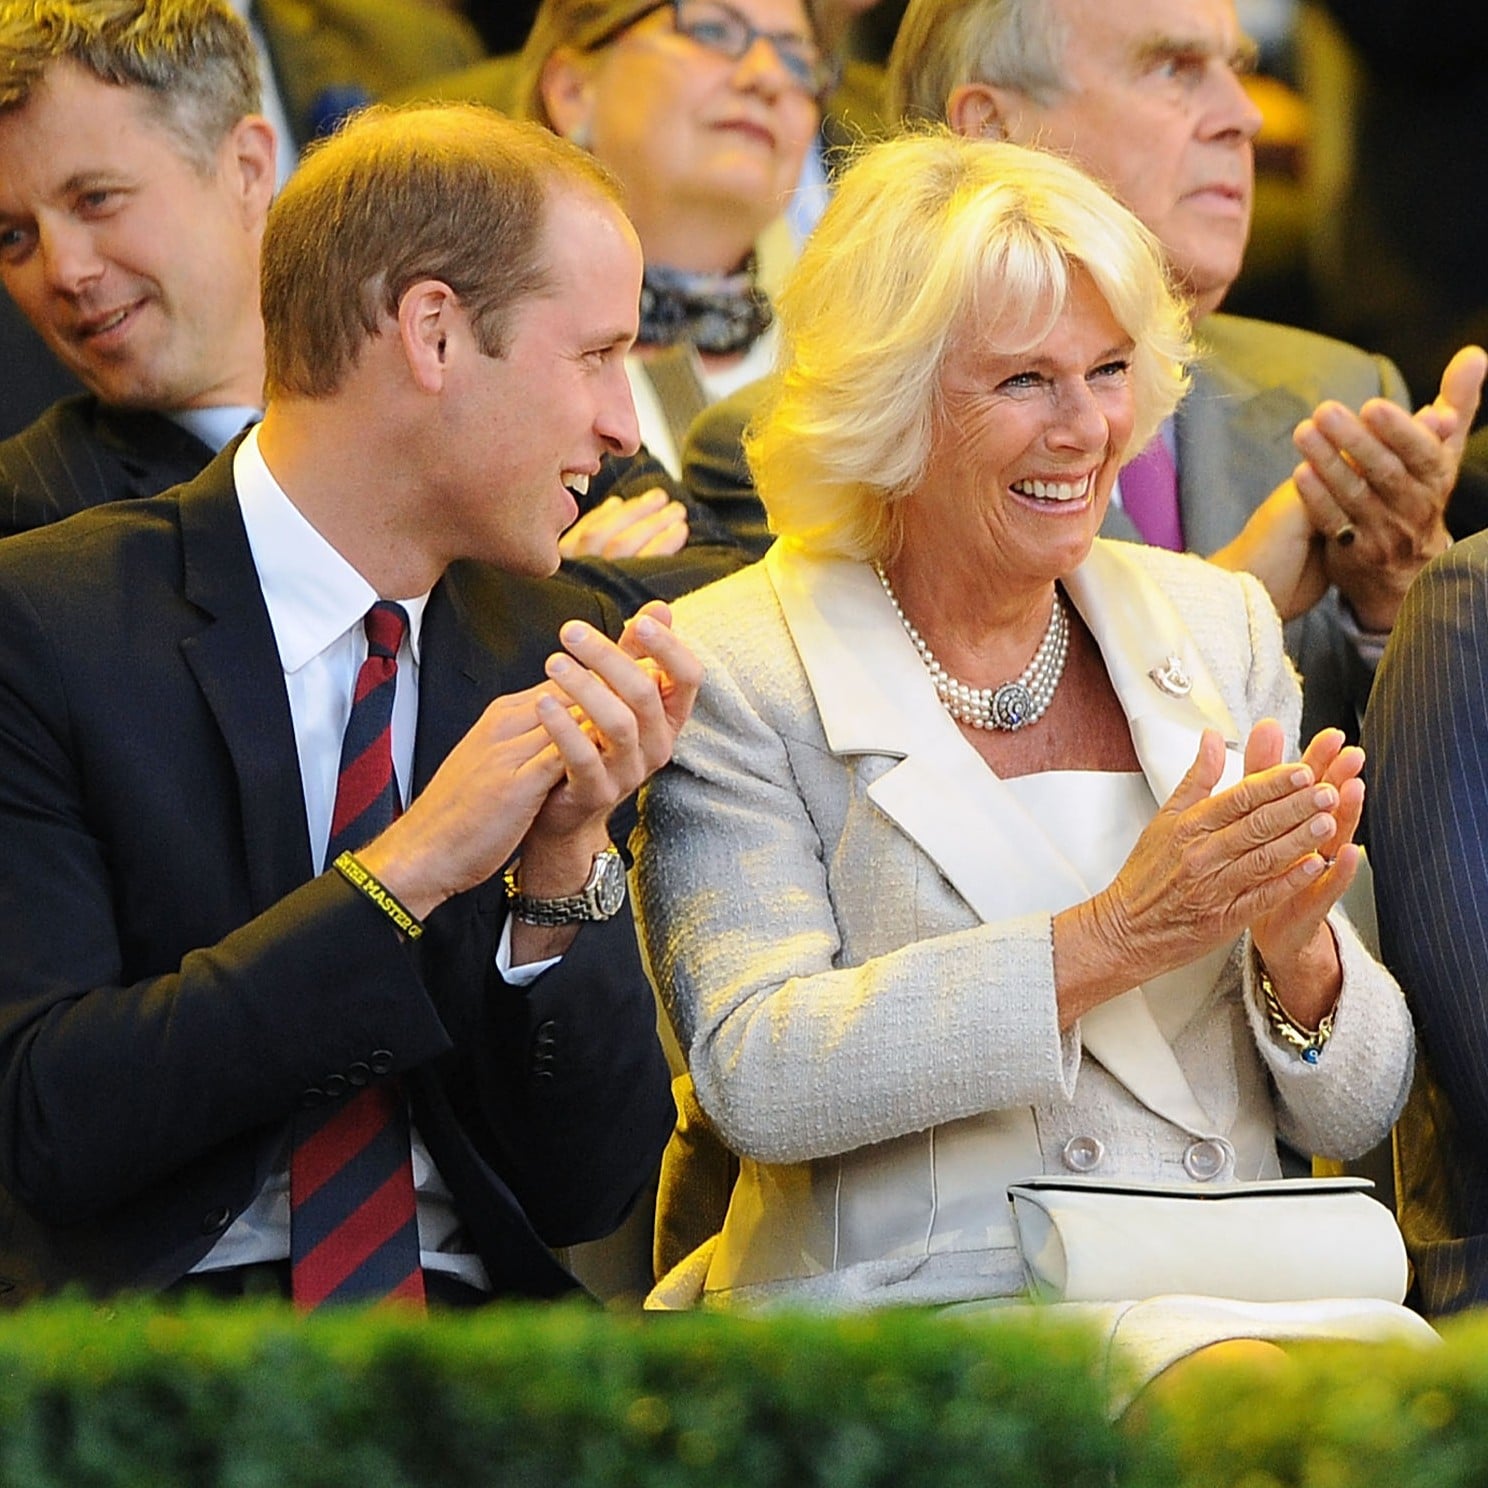 Prince William Kicks Camilla From Windsor Palace And Details Of Prince Harry $35 Million Fine!